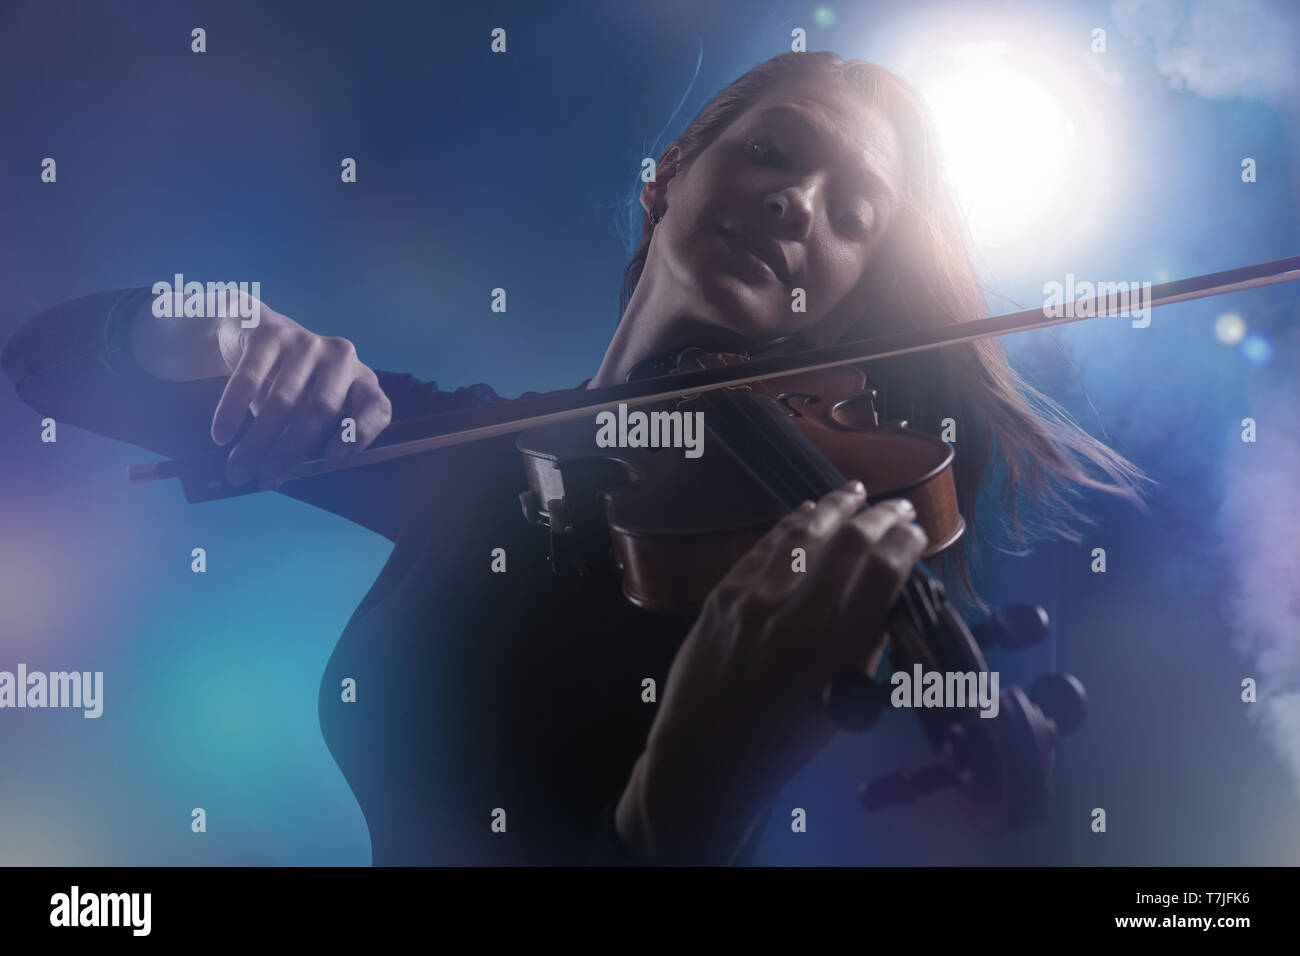 Beautiful young woman playing the violin on dark blue background. Fog in the background. Studio shot Stock Photo